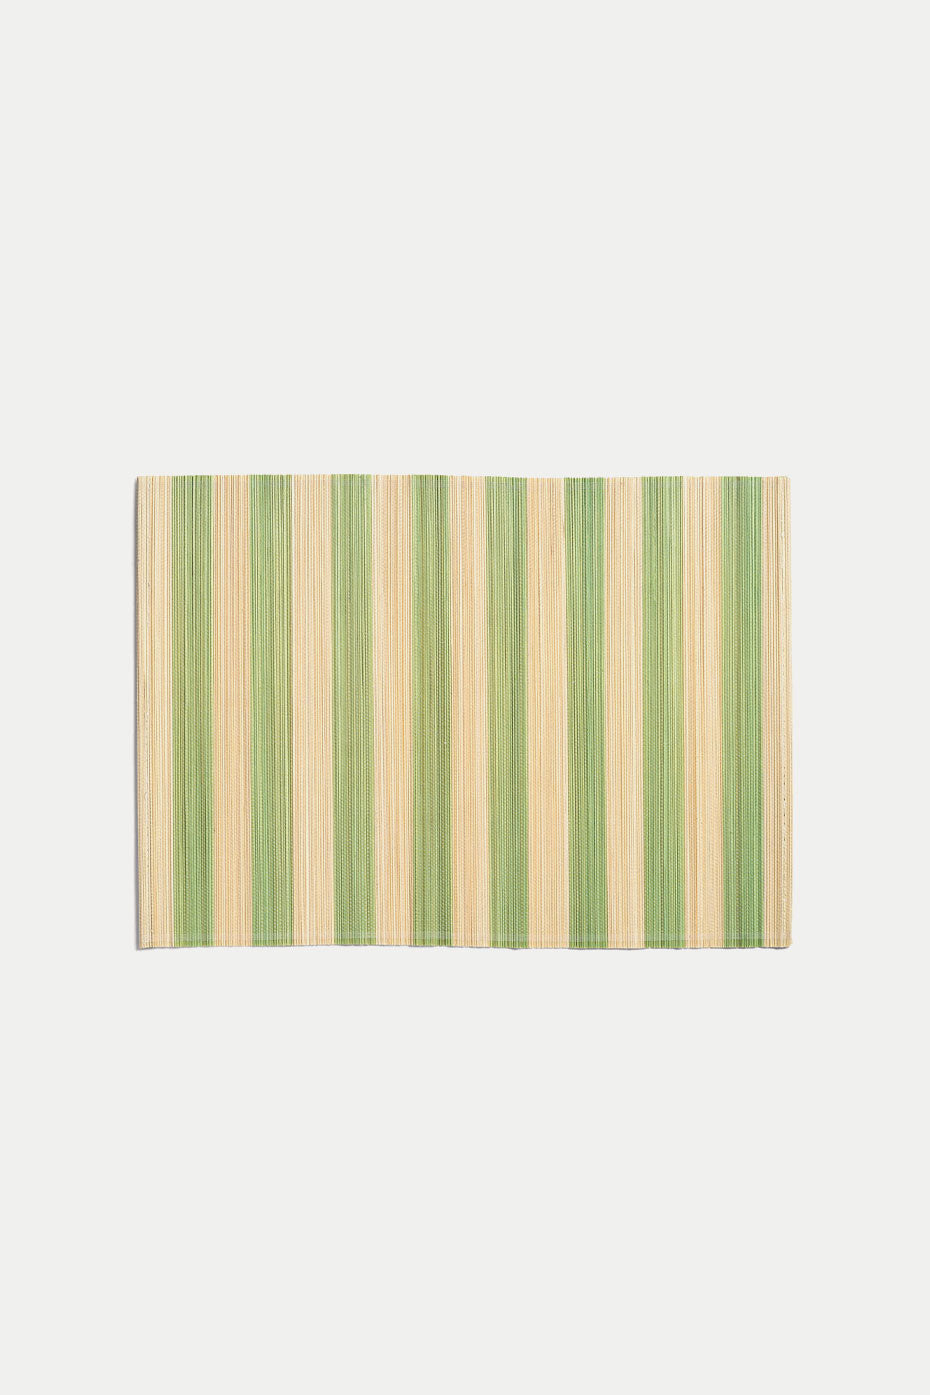 &klevering Light Green Bay Placemat